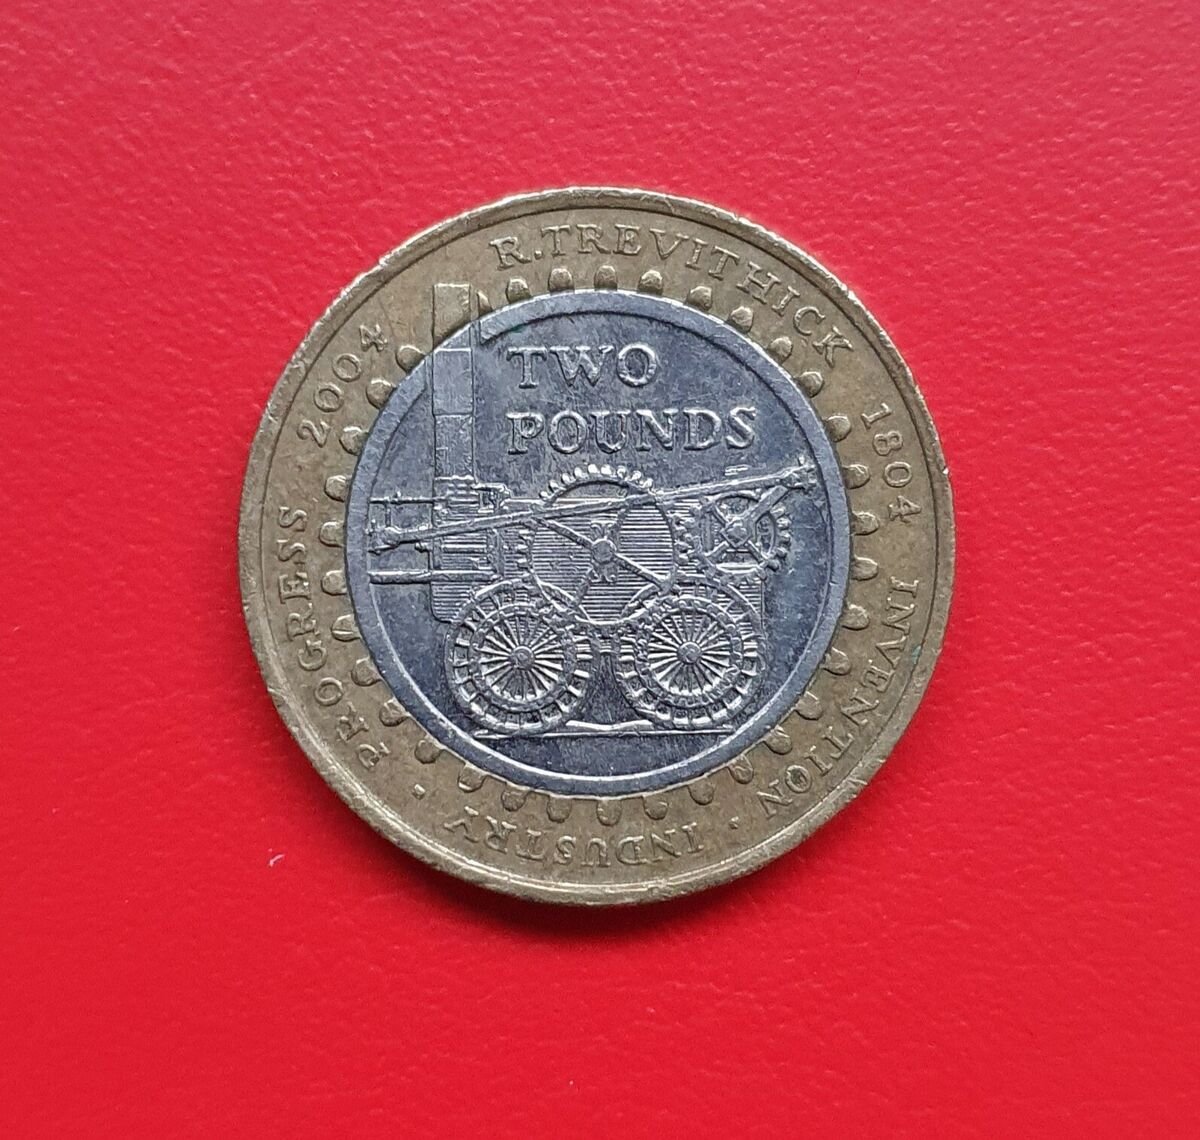 Trevithick Steam Locomotive £2 Coin